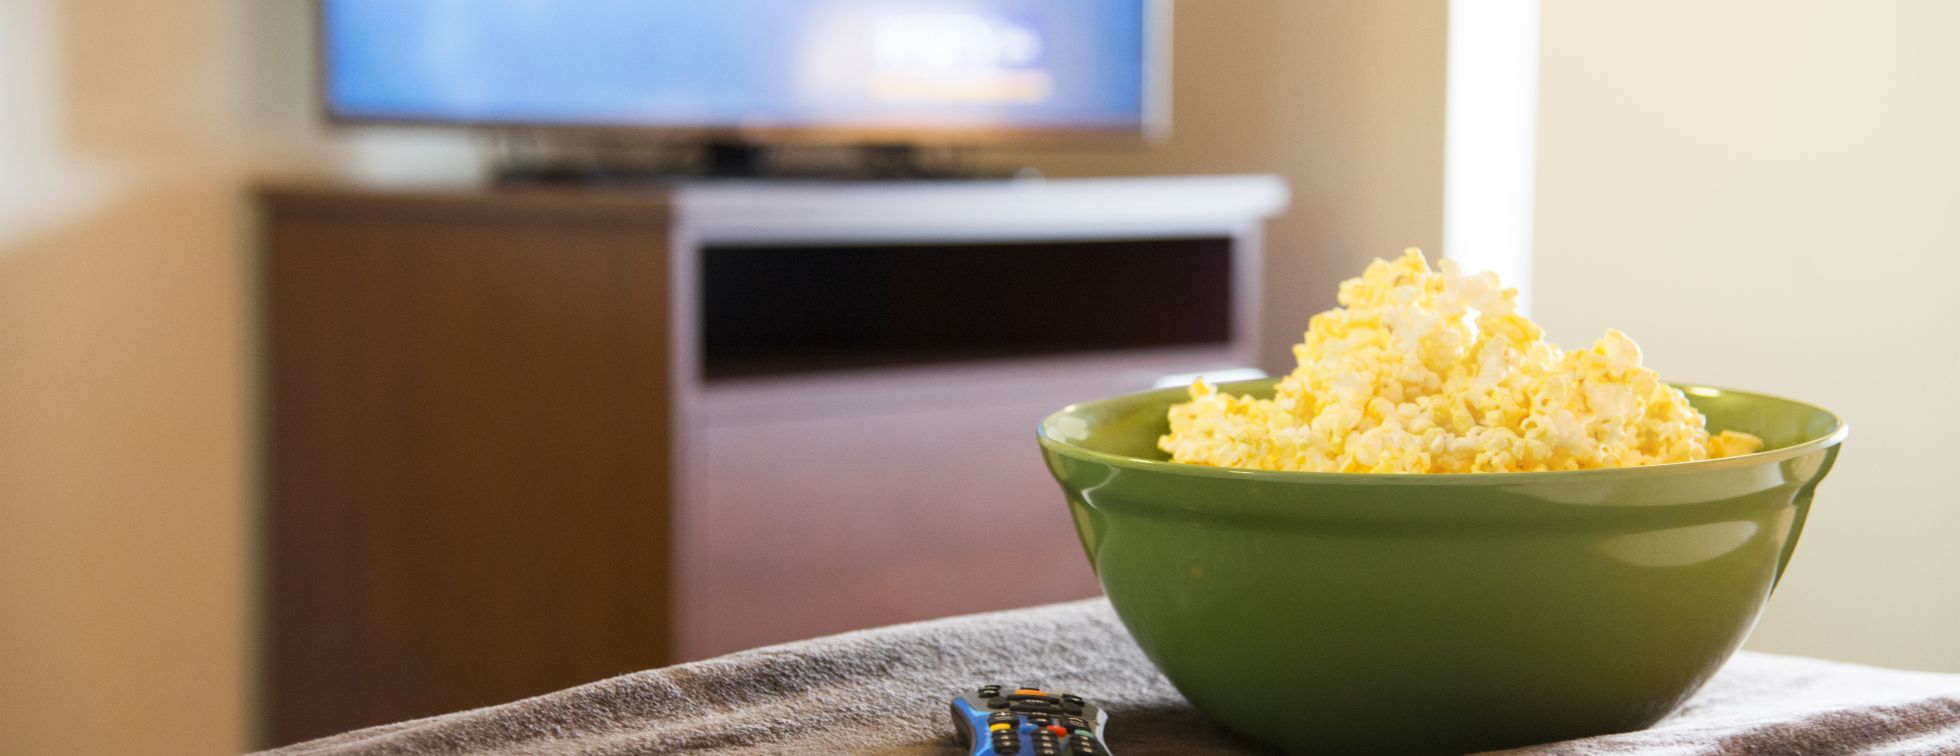 Popcorn and a movie in a hotel room 